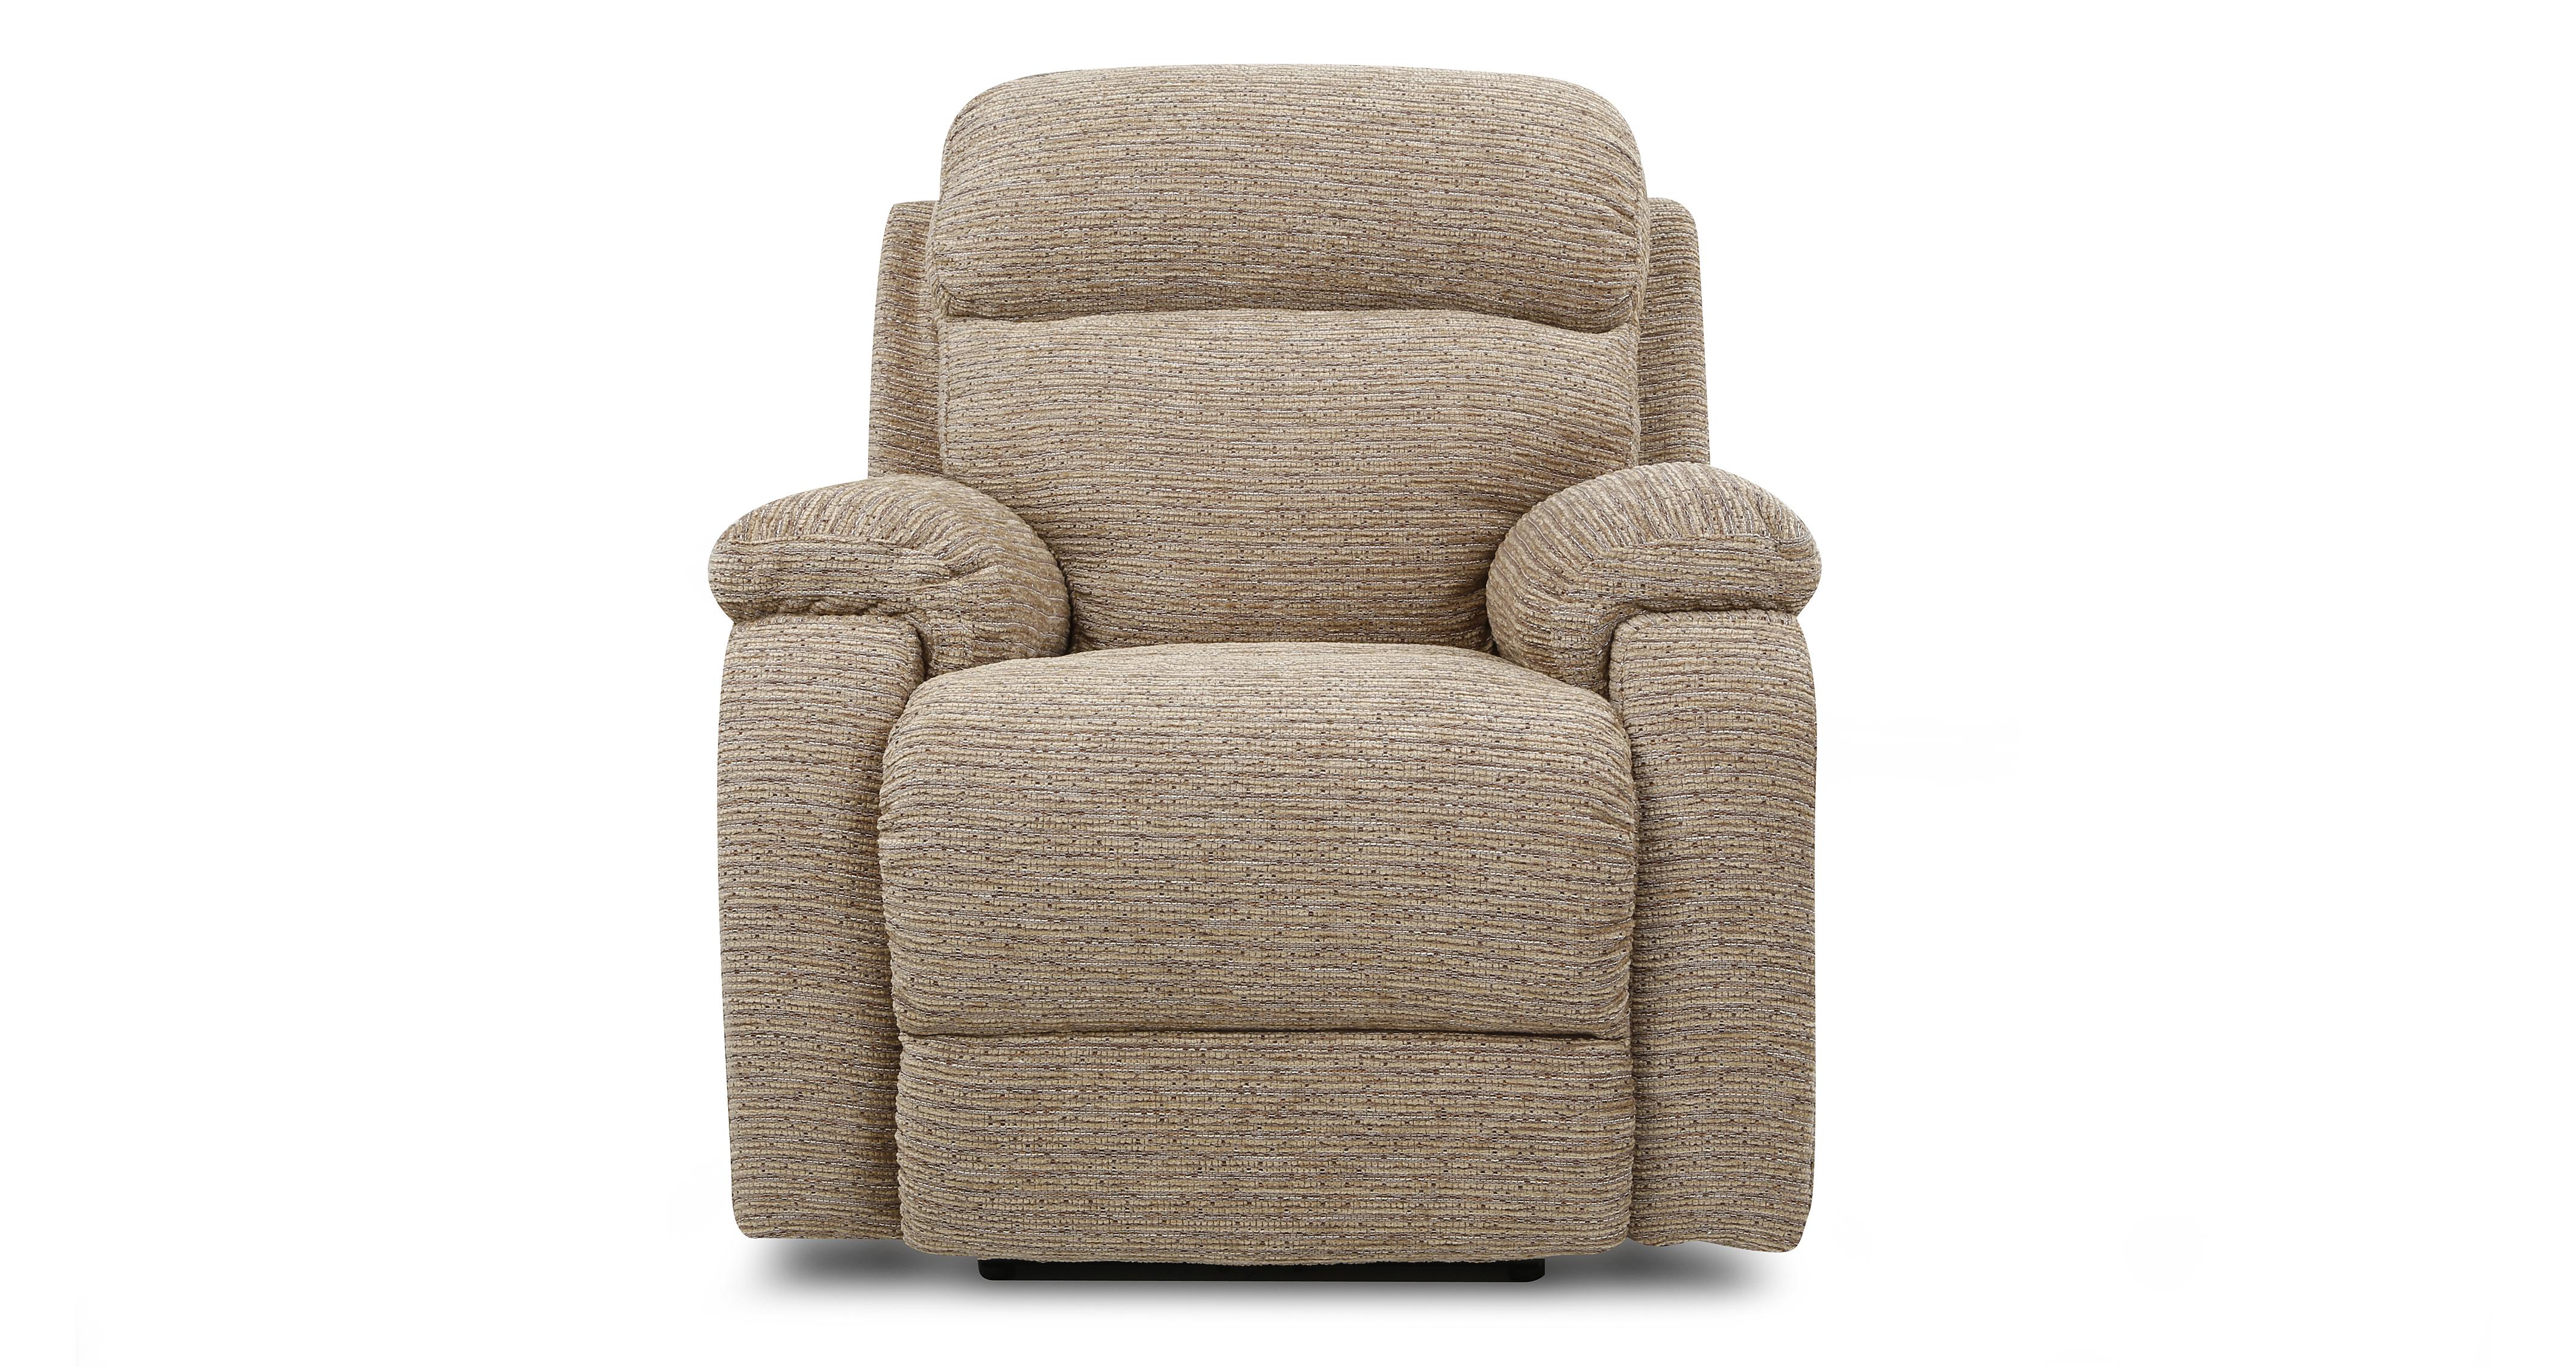 Armchair Recliner Dfs / 1 Recliner Armchair From Dfs 2nd Now Sold For